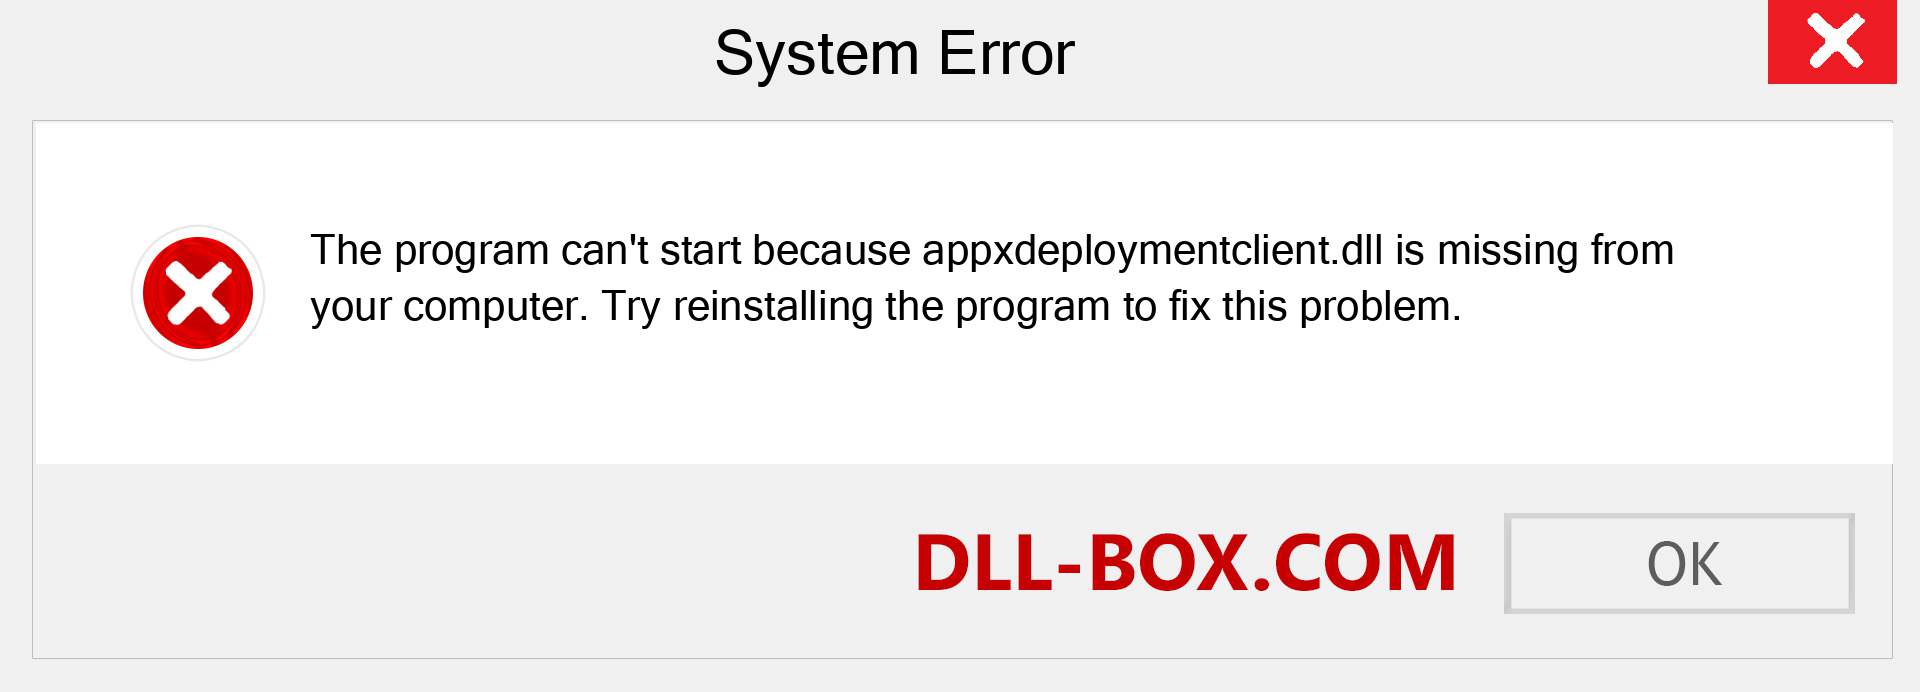  appxdeploymentclient.dll file is missing?. Download for Windows 7, 8, 10 - Fix  appxdeploymentclient dll Missing Error on Windows, photos, images